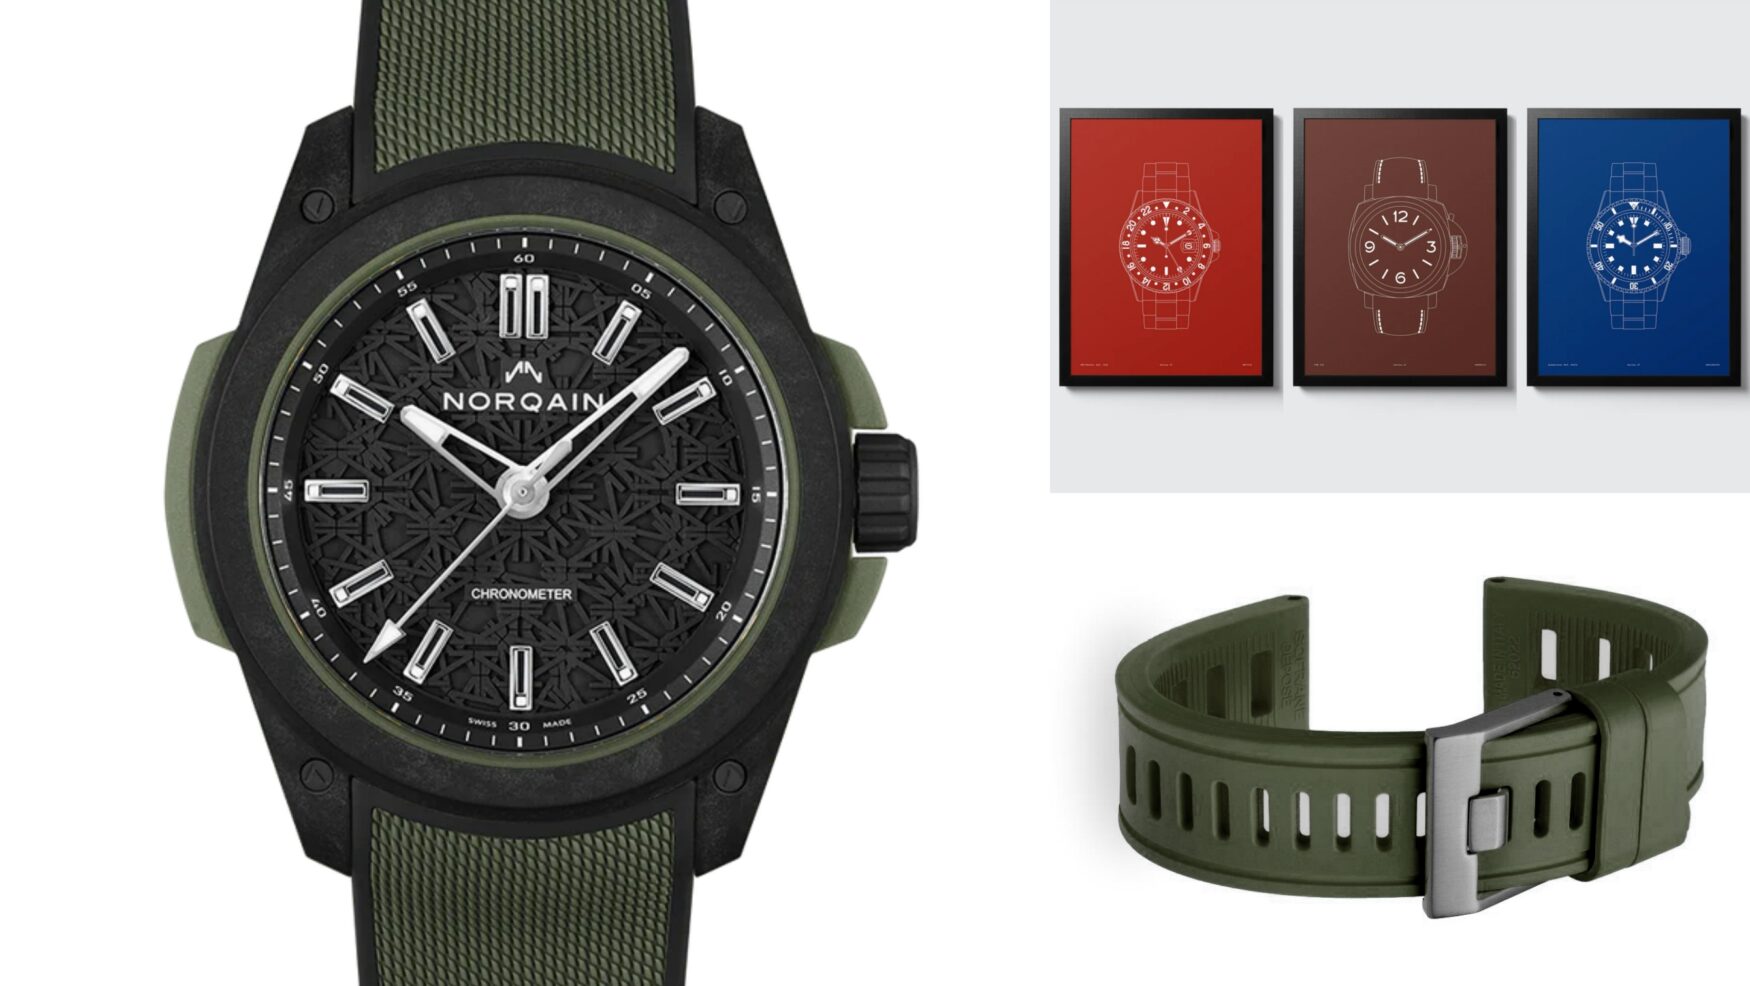 The Time+Tide Shop Father’s Day gift guide